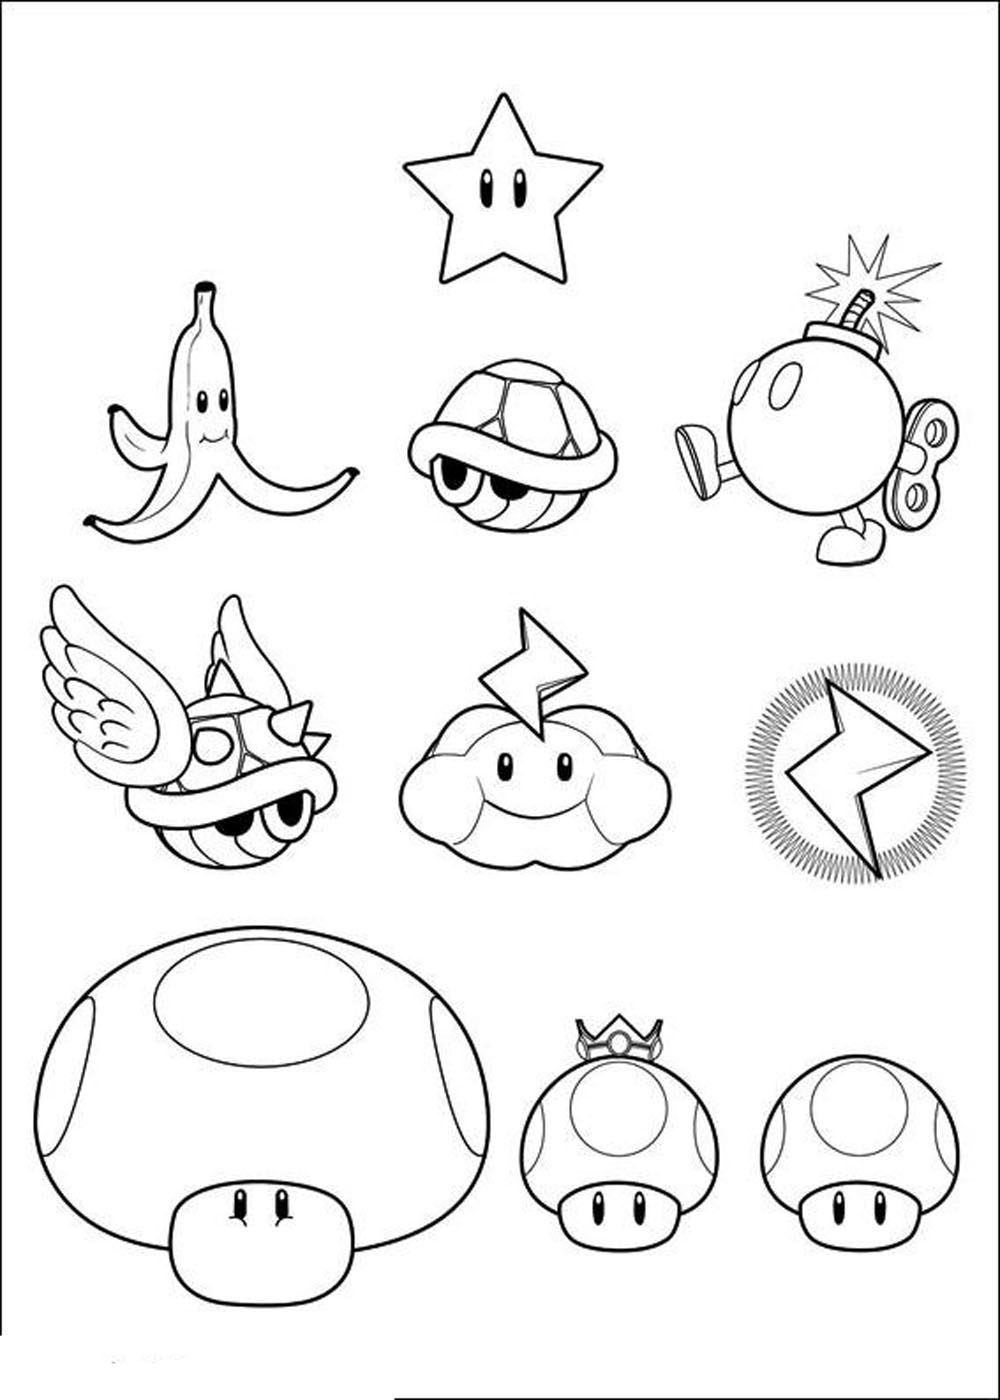 super-mario-characters-coloring-pages-at-getcolorings-free-printable-colorings-pages-to